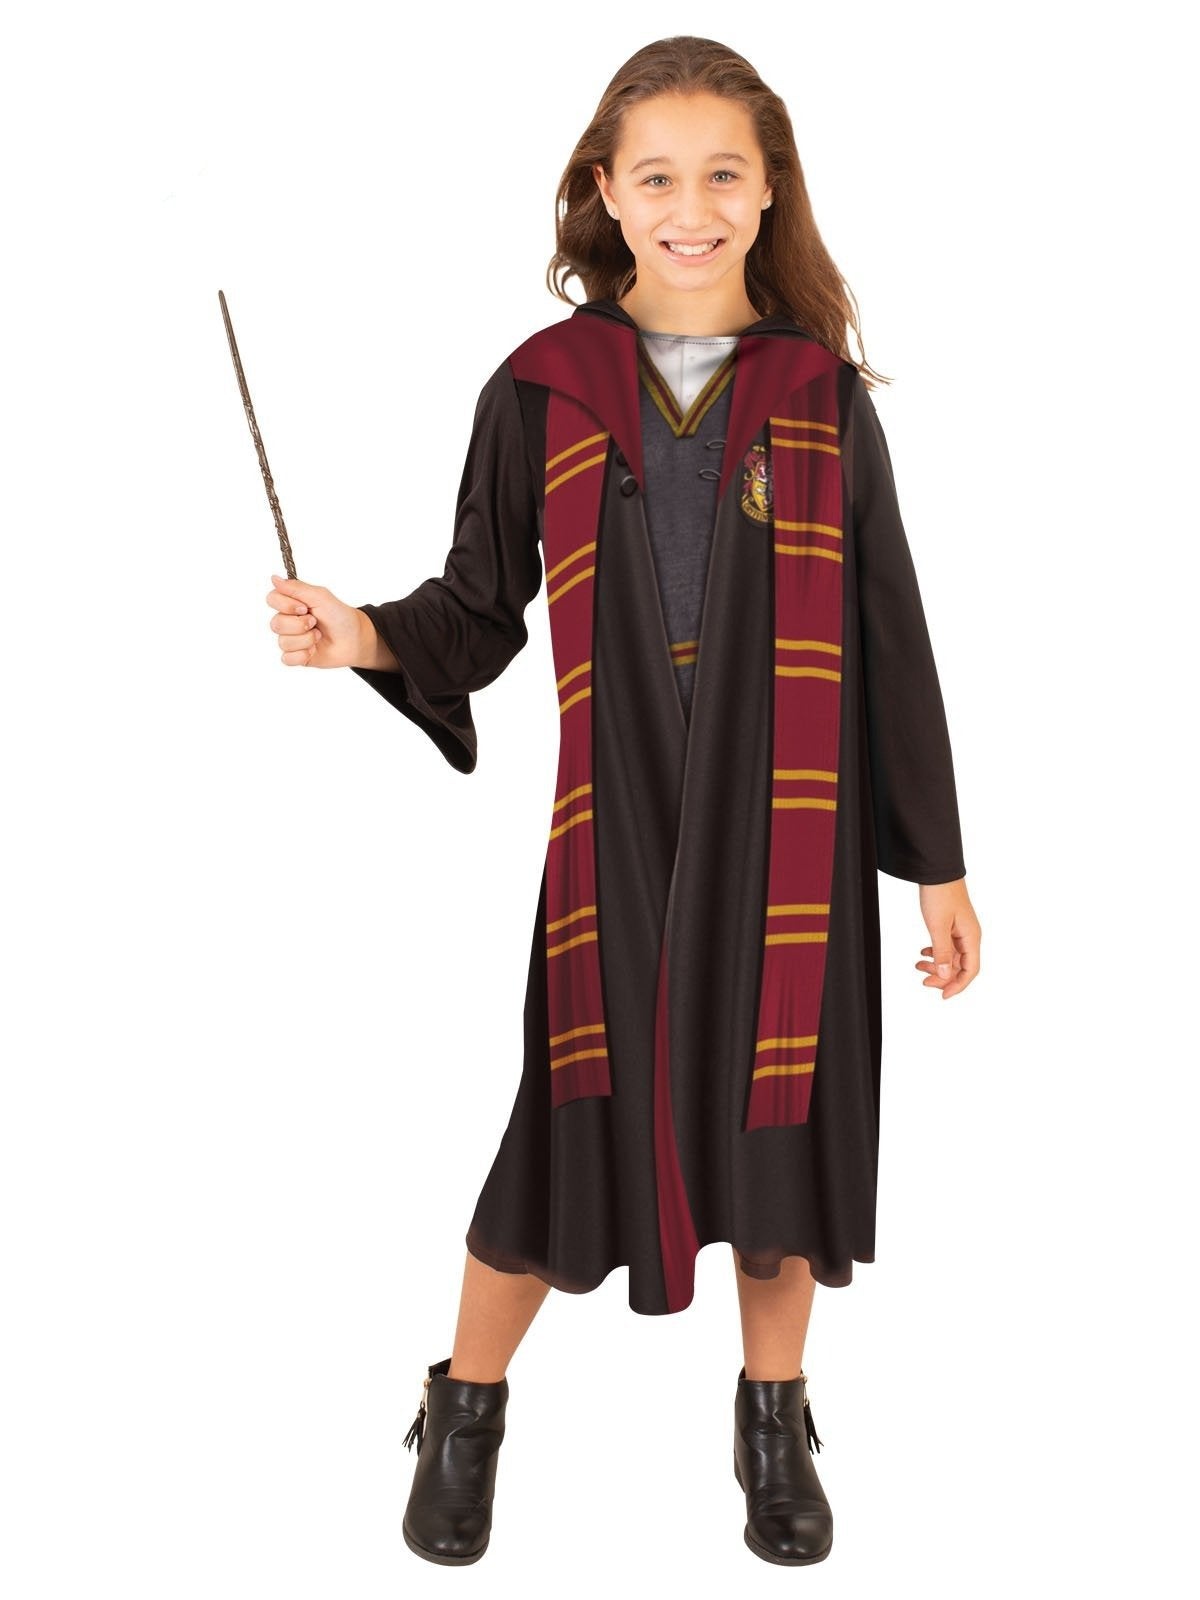 Hermione Sweater and Robe for Kids - Warner Bros Harry Potter